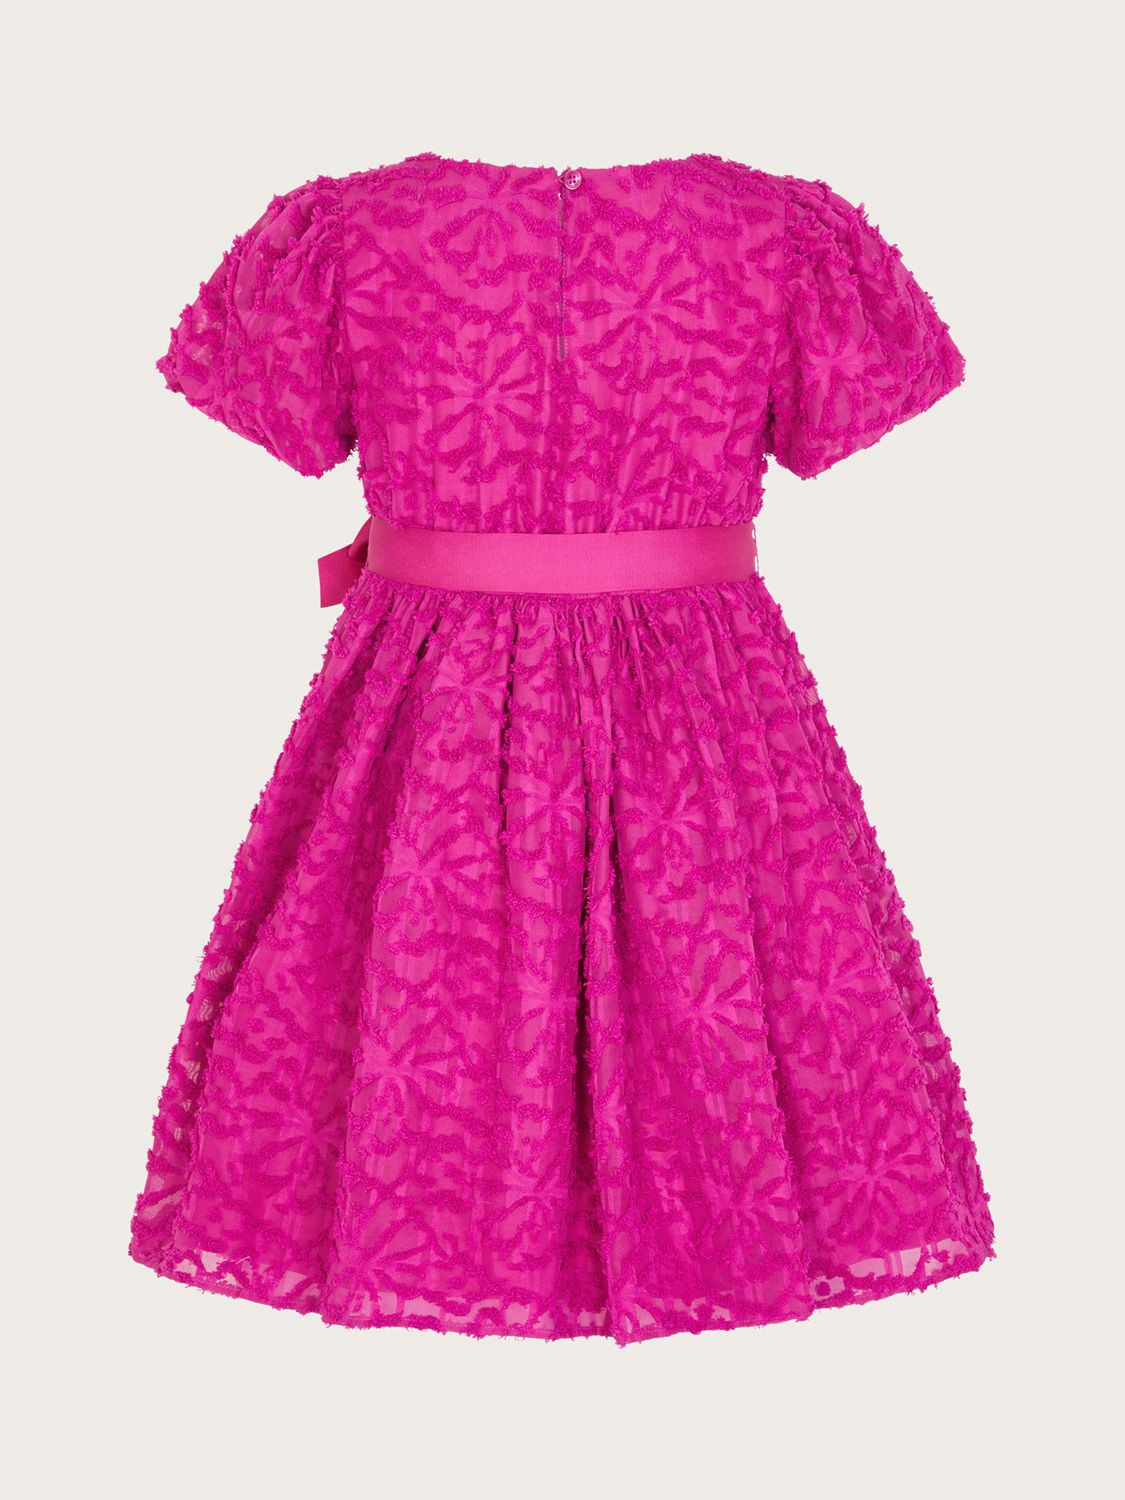 Monsoon Kids' Abstract Textured Puff Sleeve Occasion Dress, Magenta, 3 years